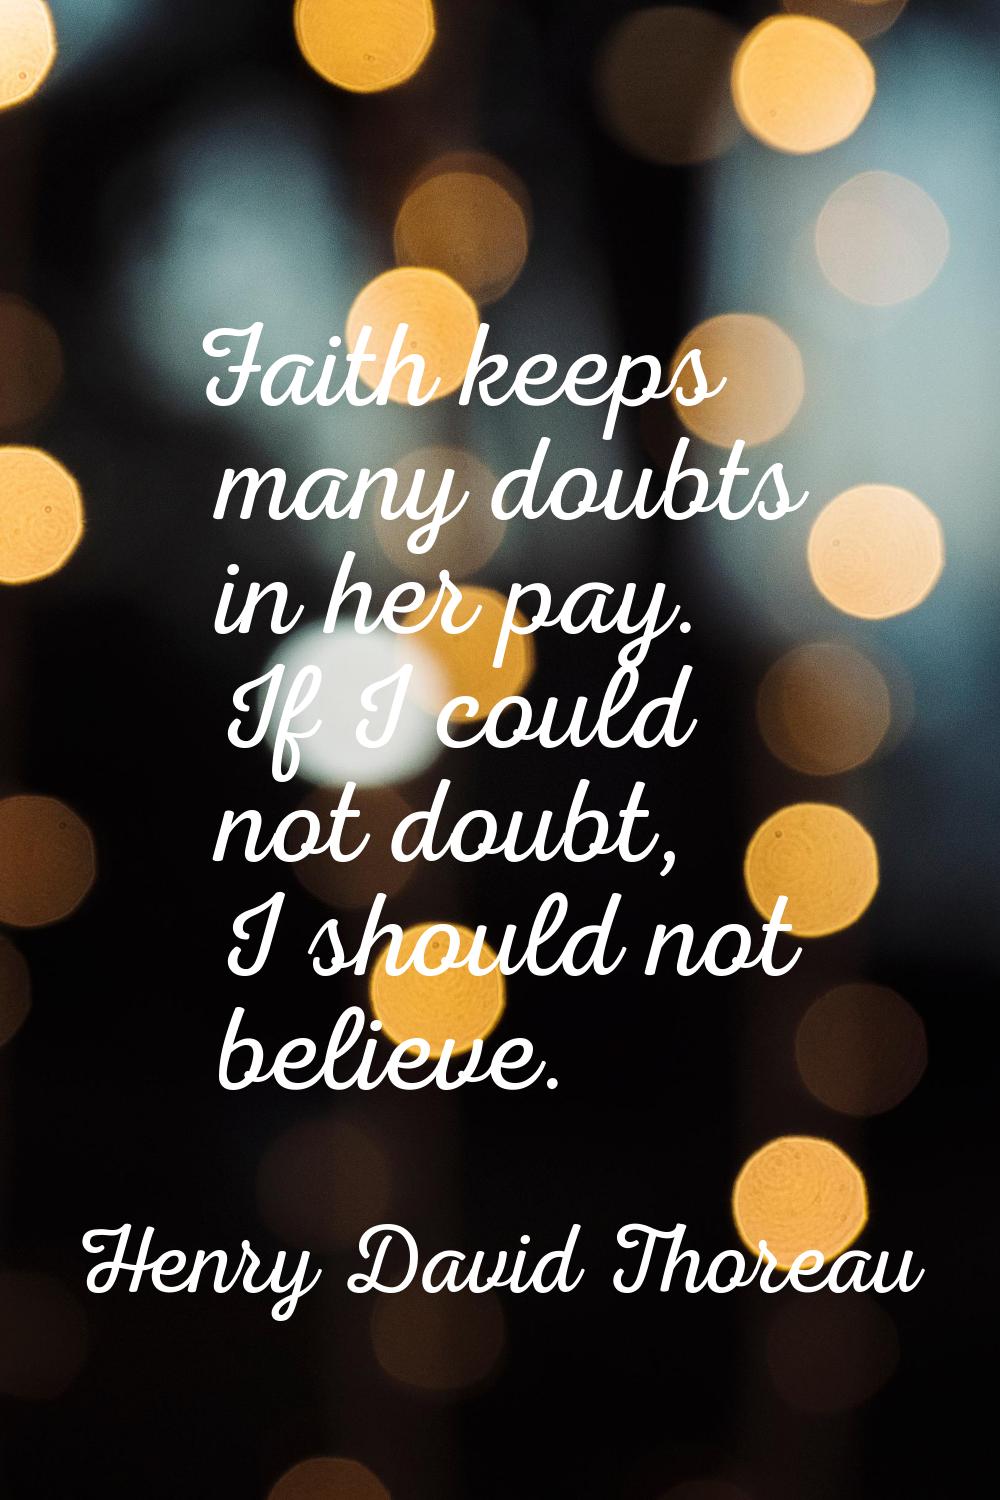 Faith keeps many doubts in her pay. If I could not doubt, I should not believe.